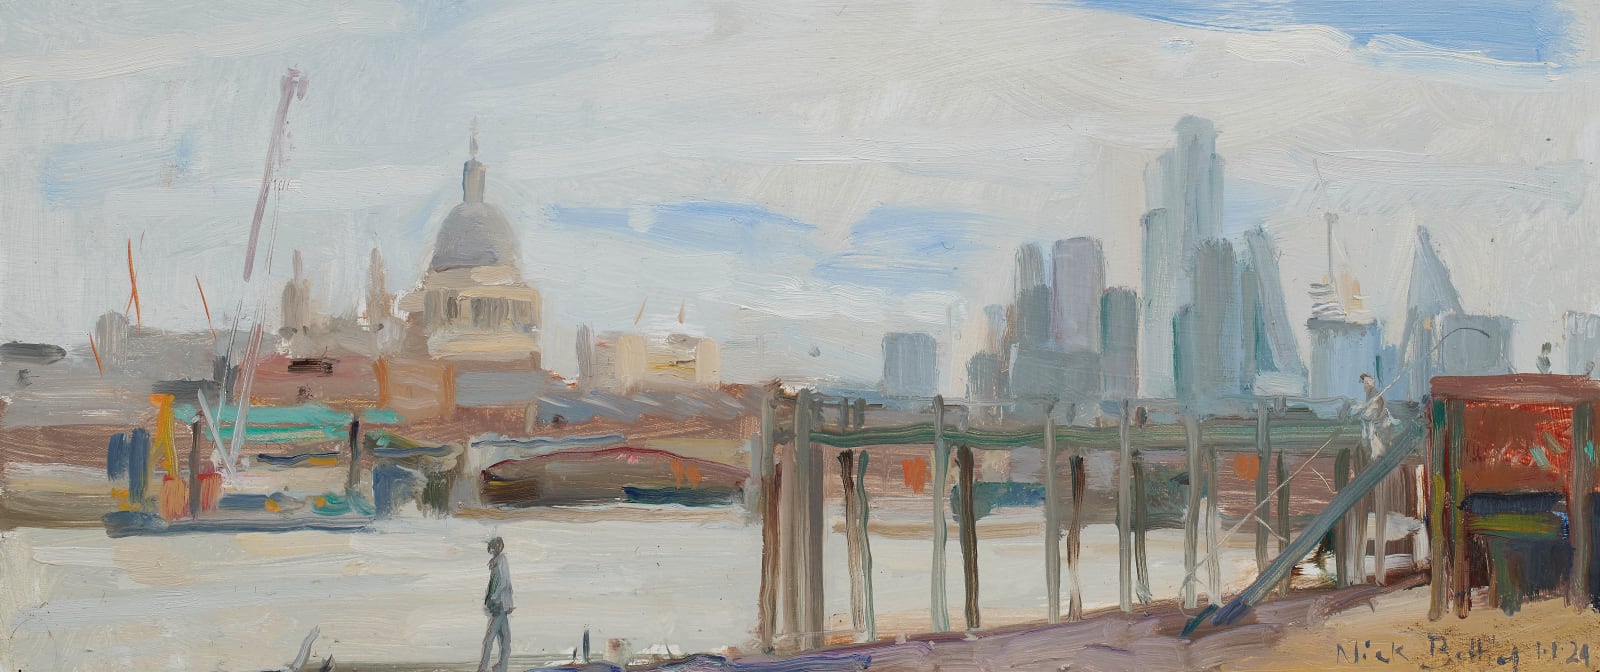 Nick Botting, 54. New Year's Day, The City across The Thames